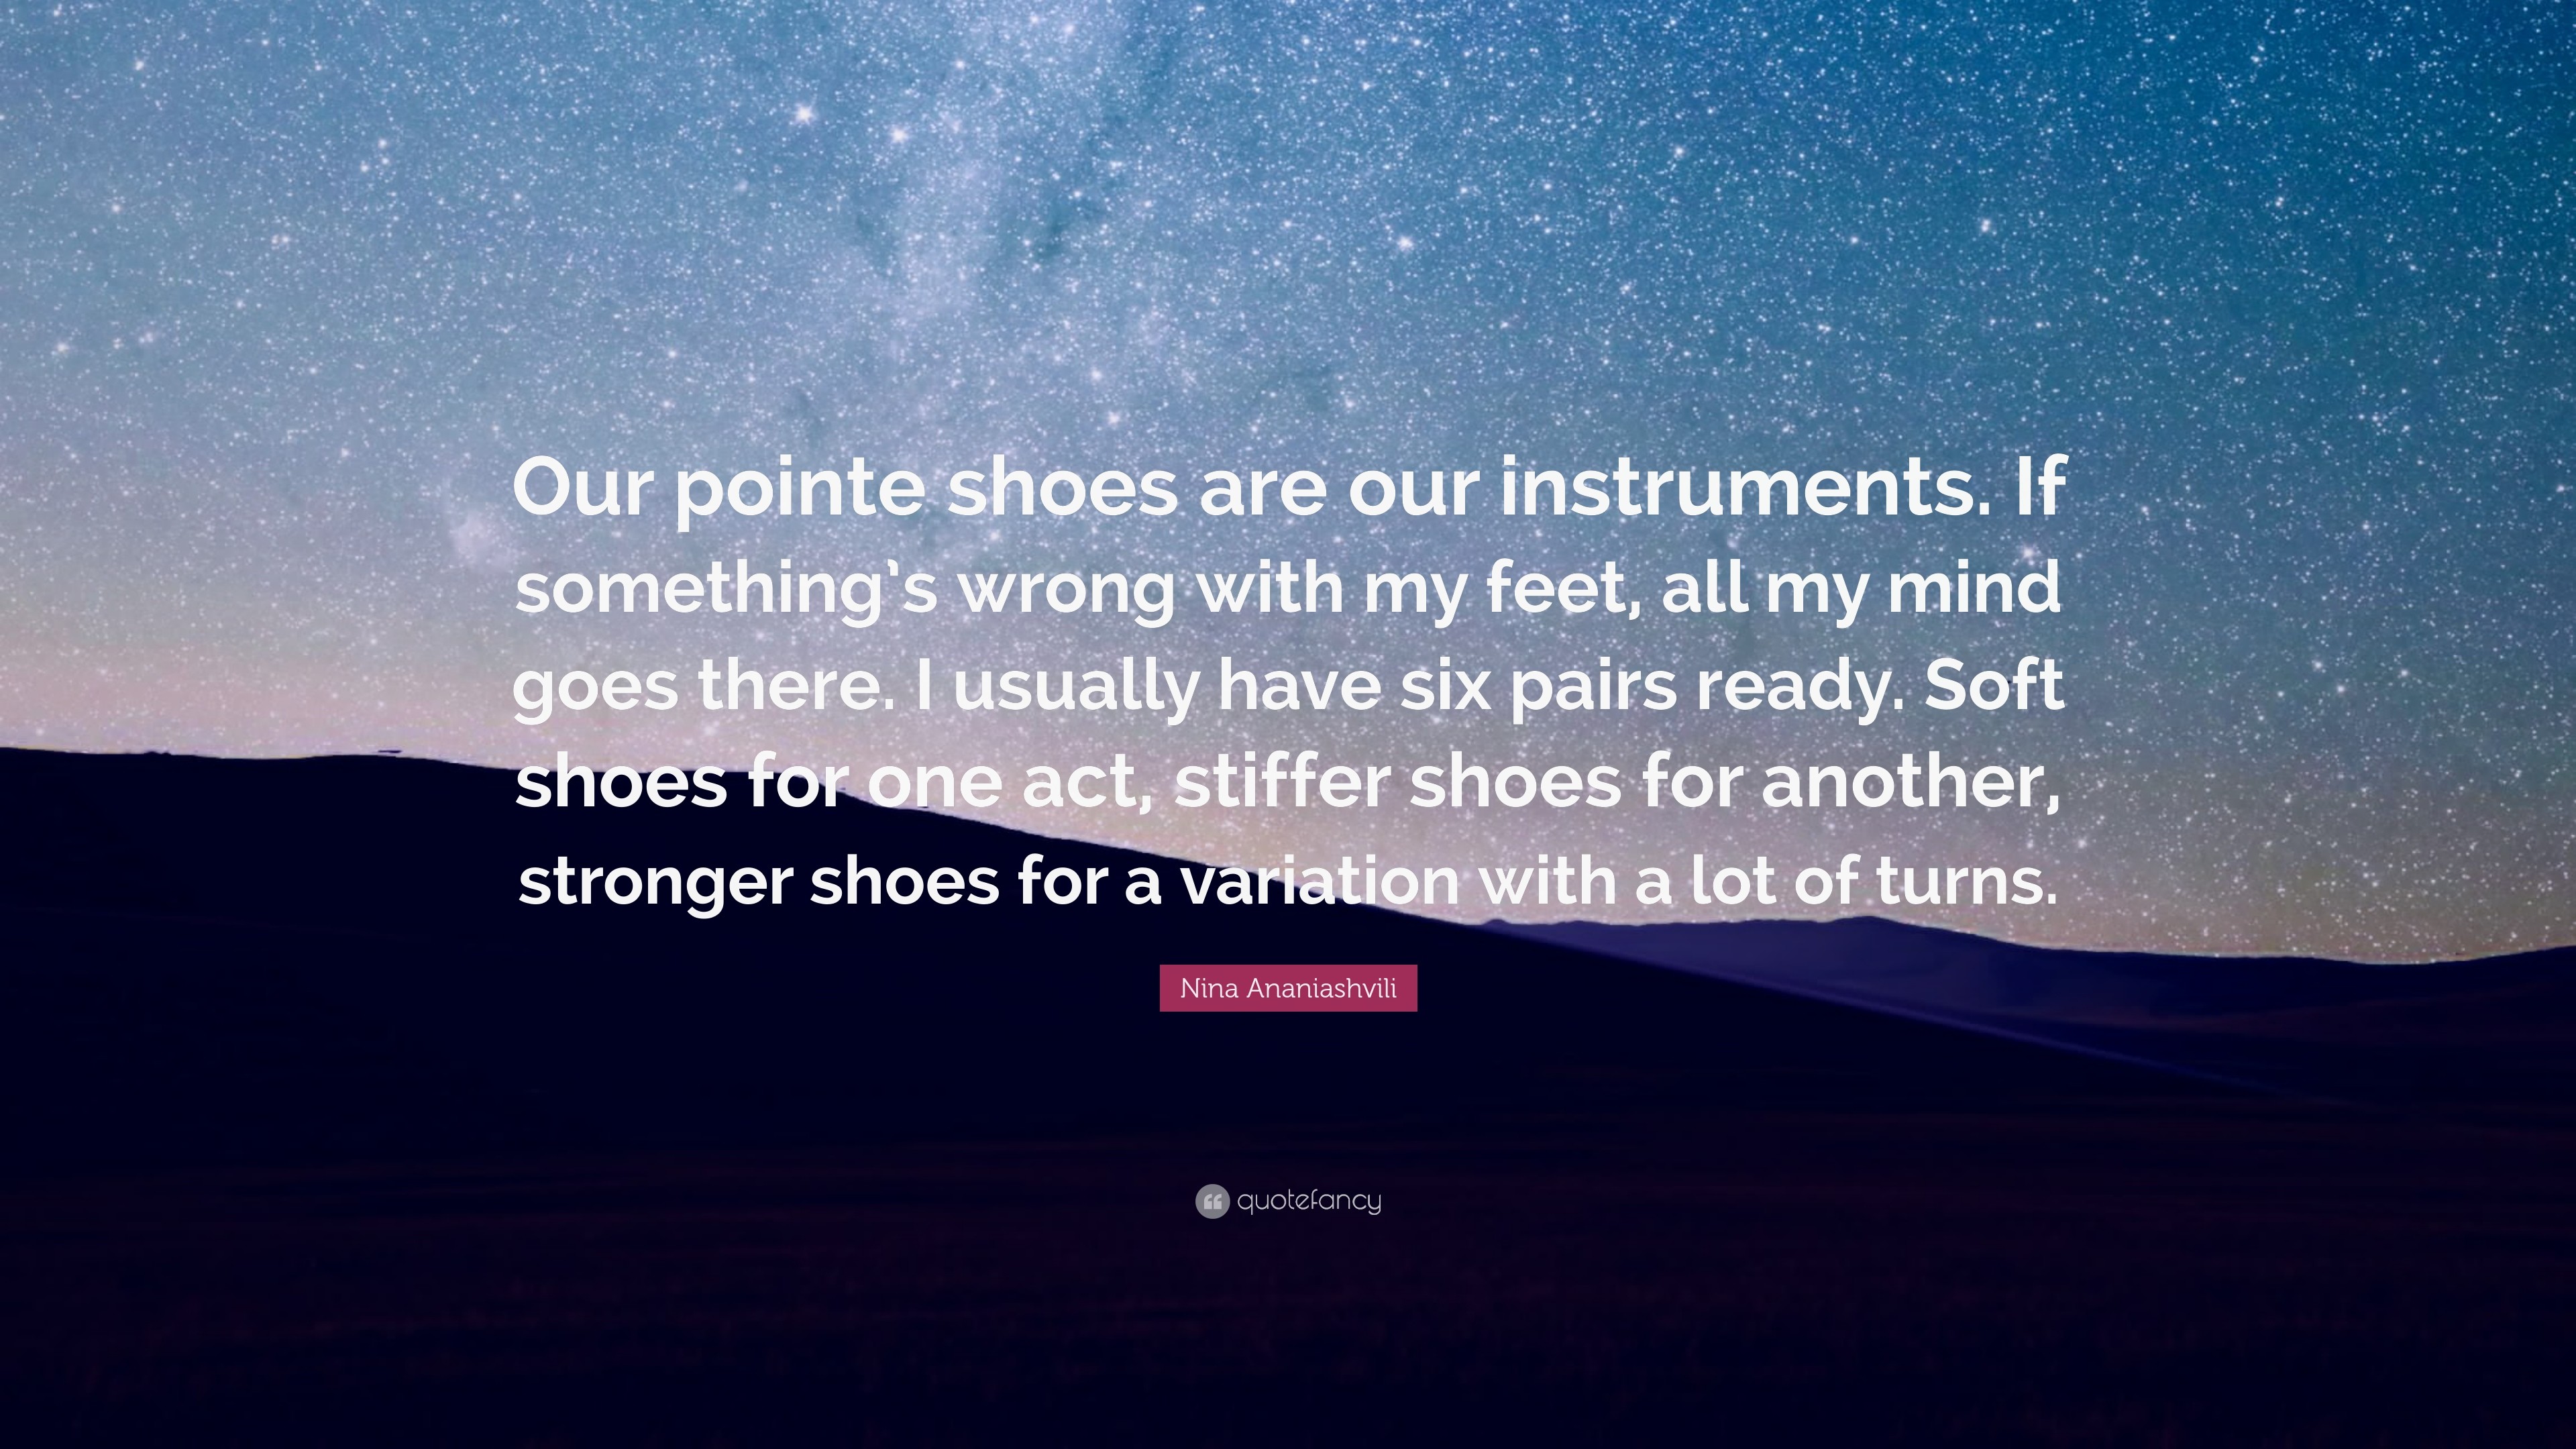 3840x2160 Nina Ananiashvili Quote: “Our pointe shoes are our instruments. If  something's wrong with